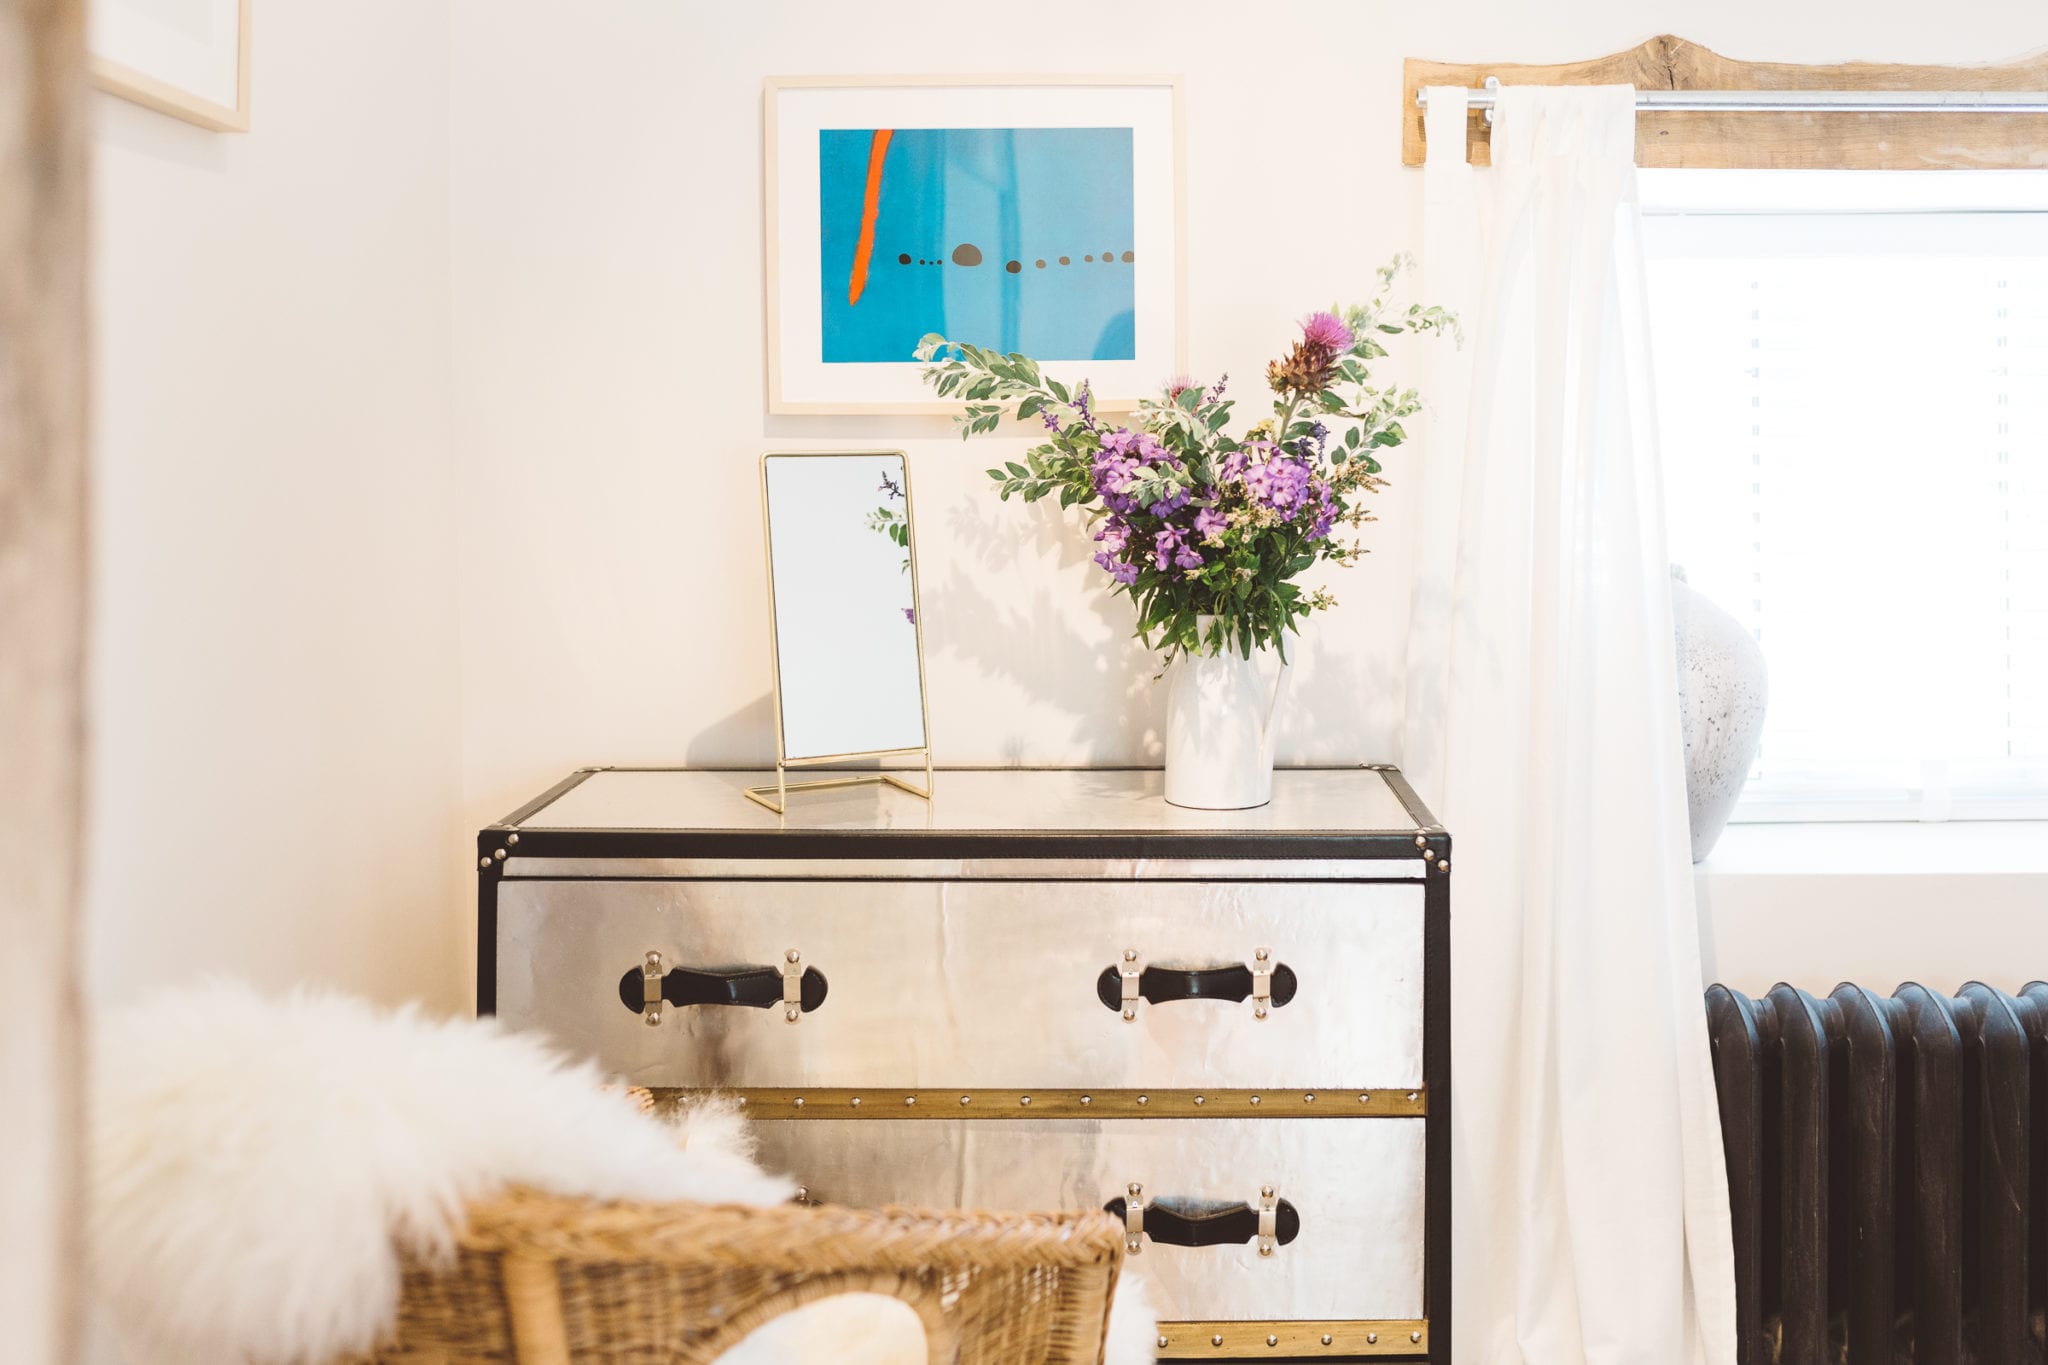 A silver chest of drawers with a small mirror and a vase of flowers on it